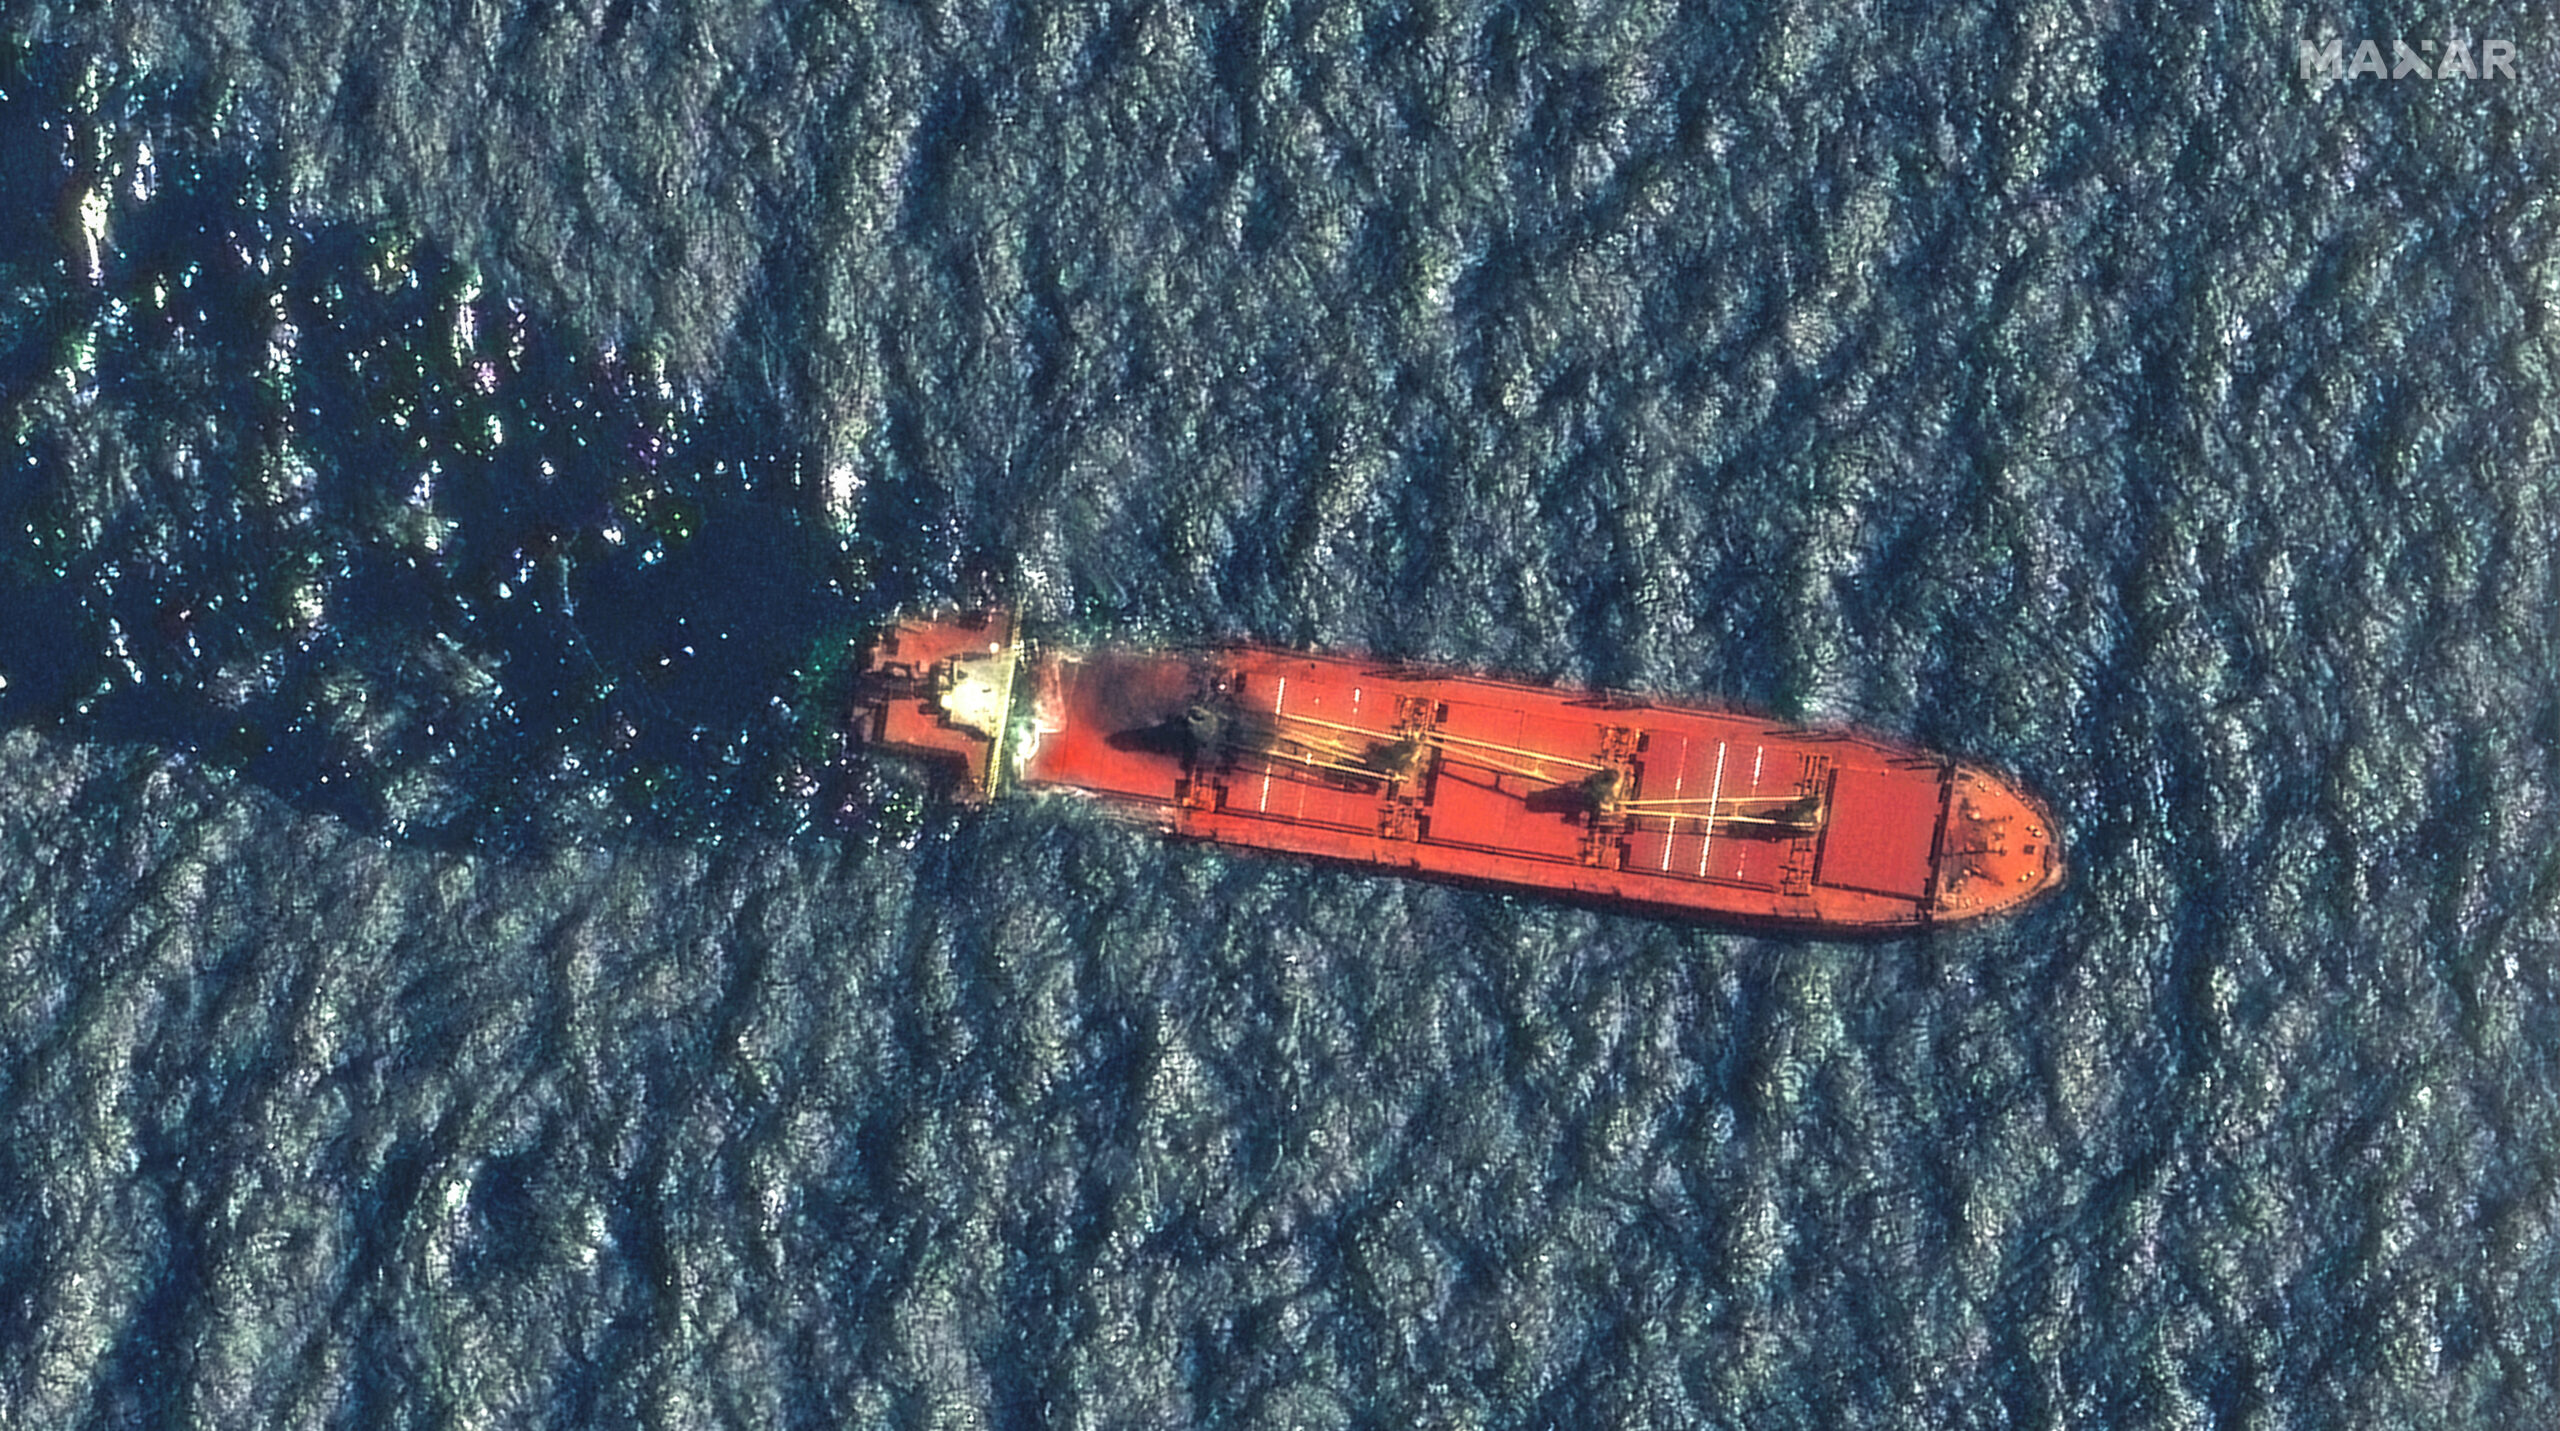 A satellite image shows the cargo ship Rubymar before it sank, on the Red Sea. Maxar Technologies/Handout via REUTERS